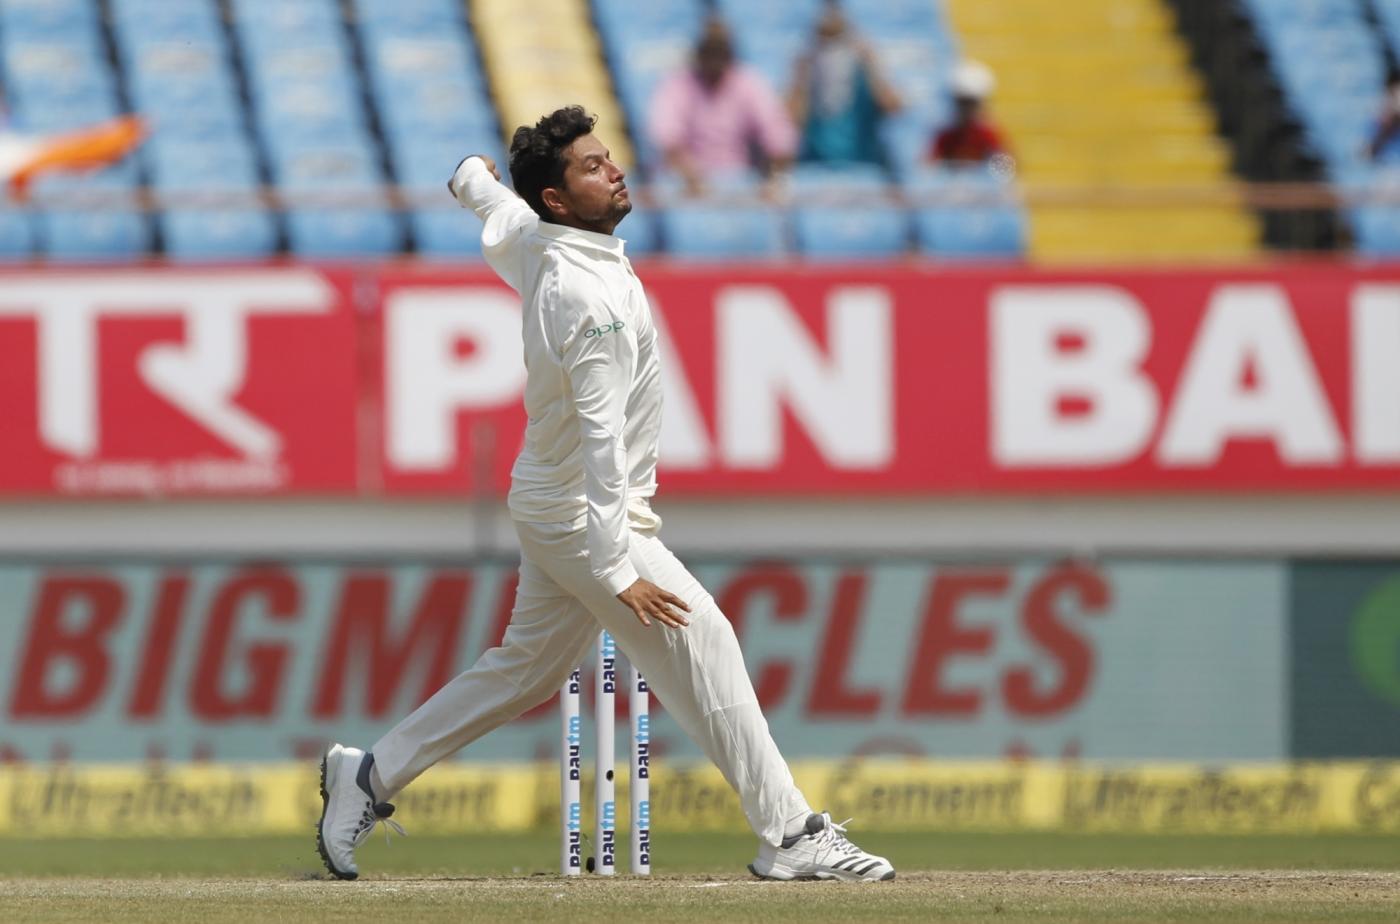 Rajkot: India's Kuldeep Yadav in action on Day 3 of the First Test match between India and West Indies at Saurashtra Cricket Association Stadium in Rajkot on Oct 6, 2018. (Photo: Surjeet Yadav/IANS) by .